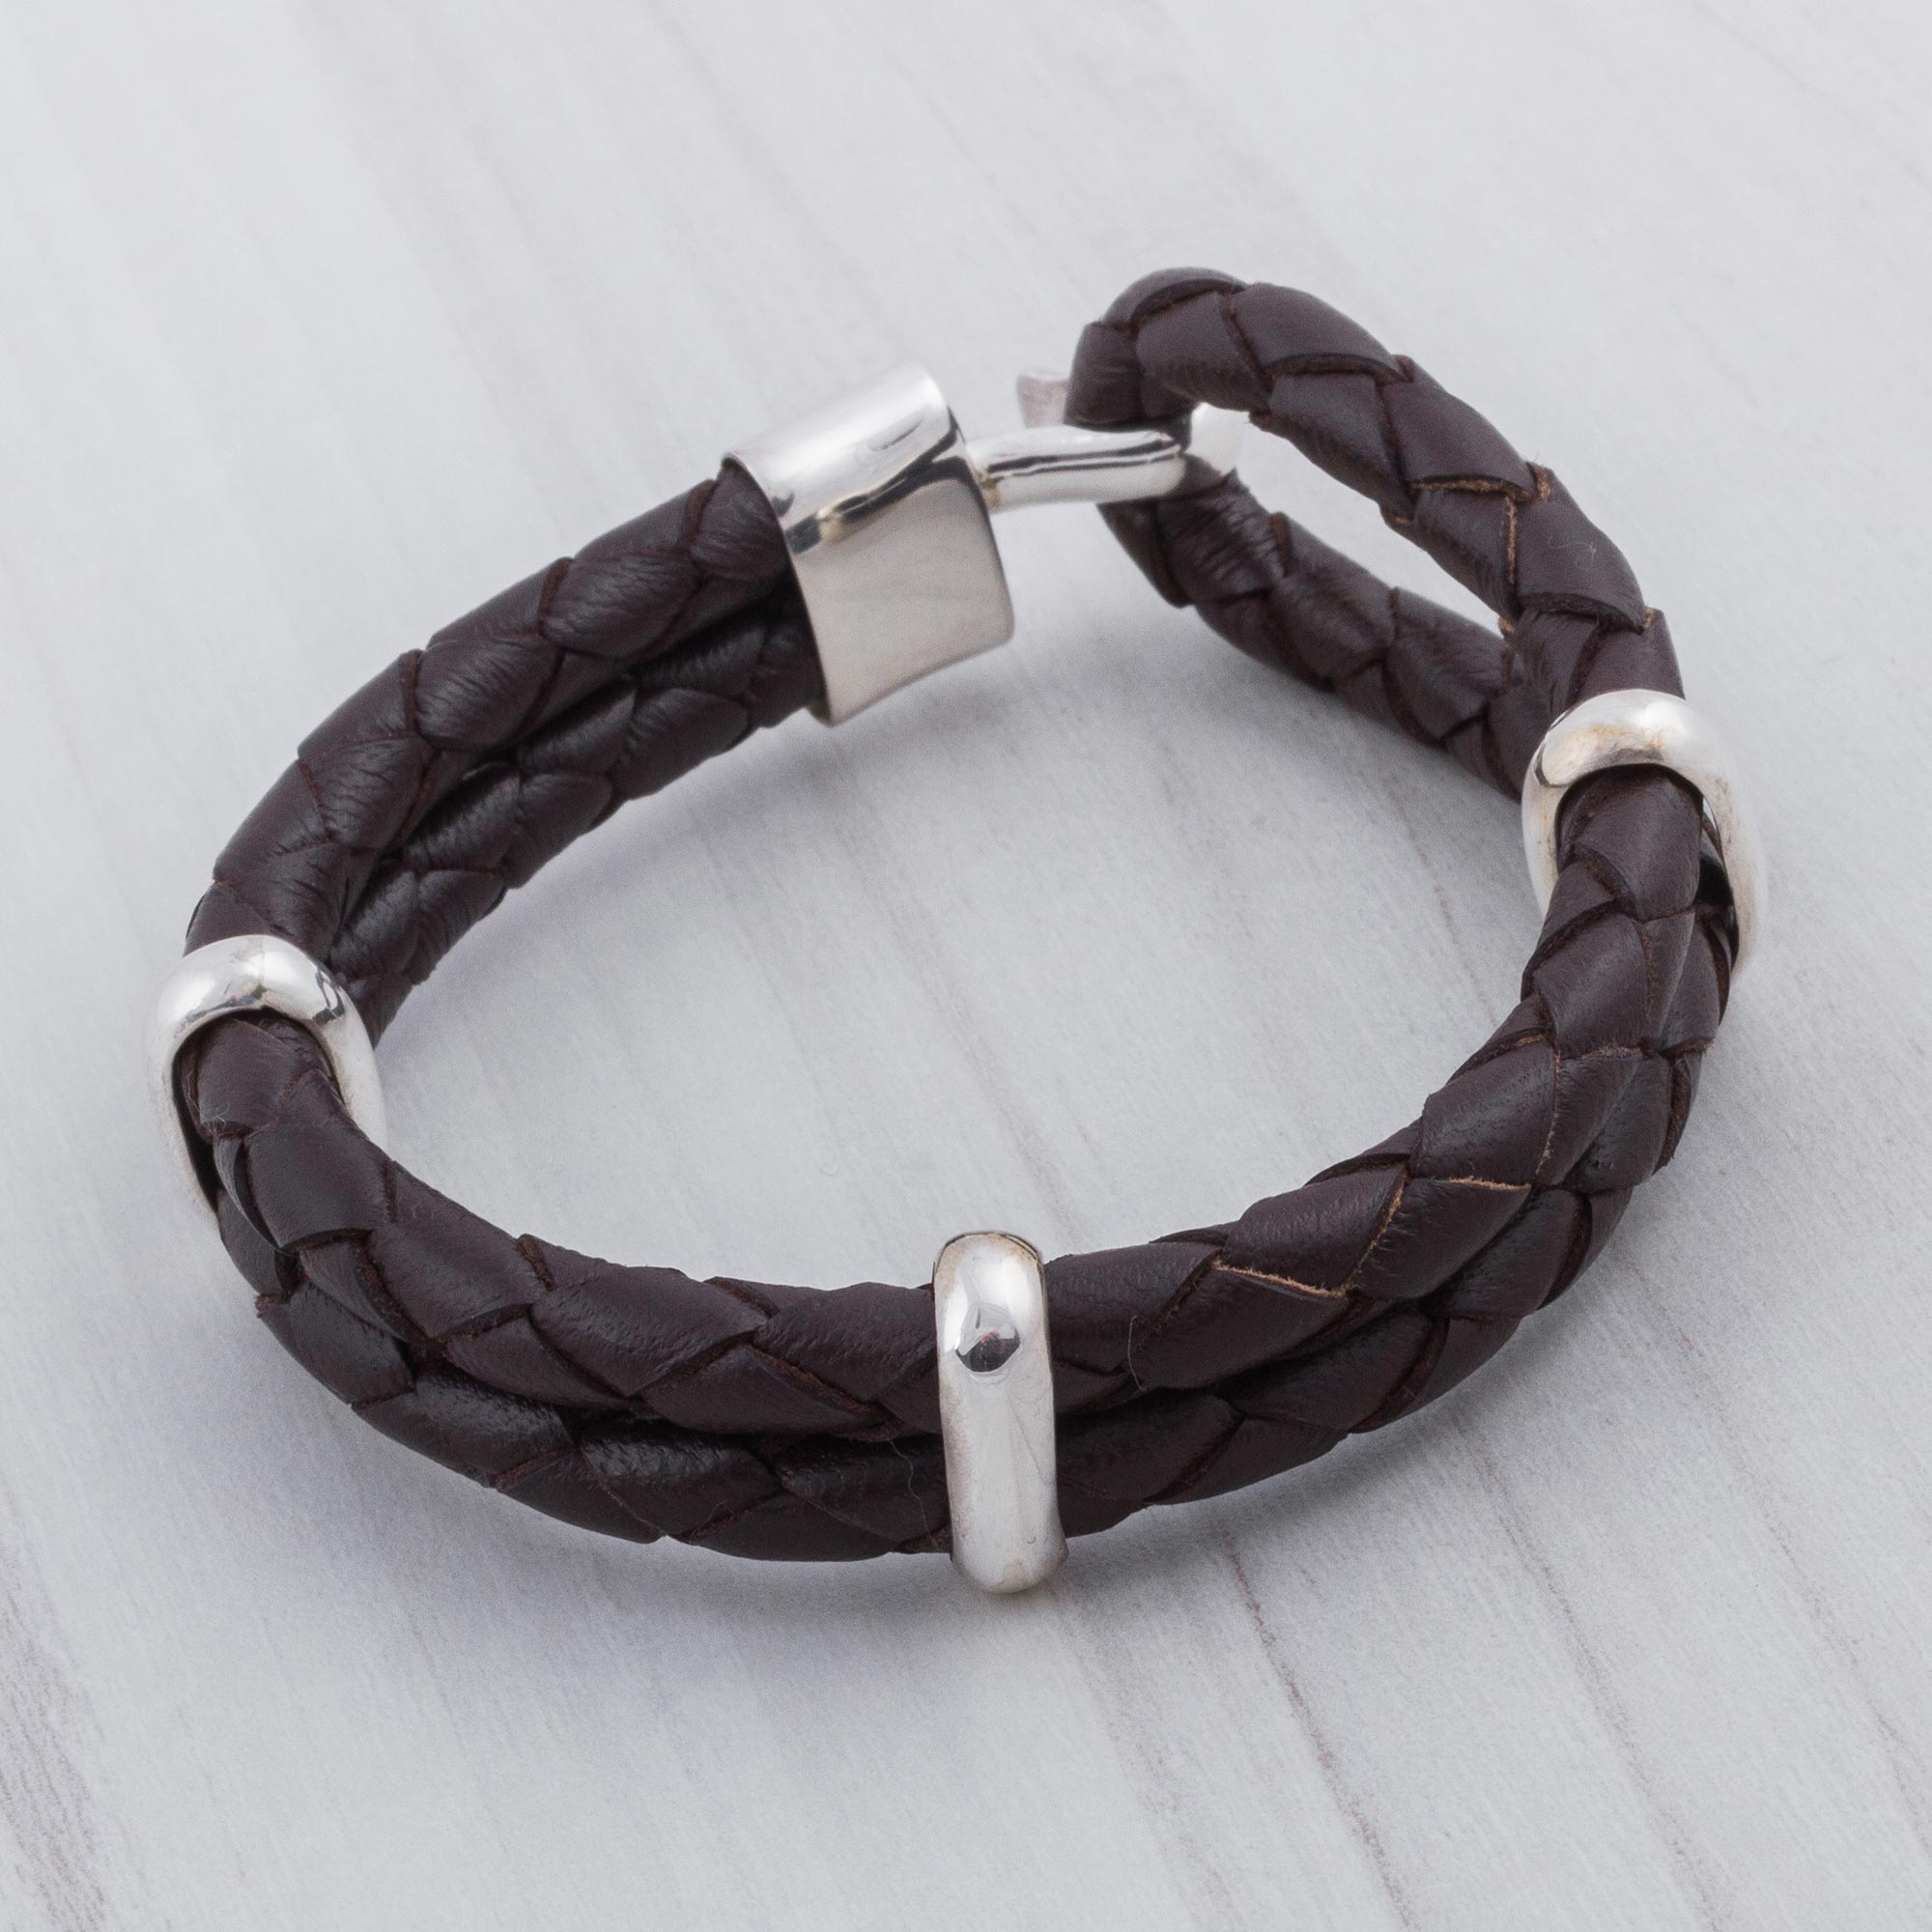 Men's Sterling Silver and Leather Wristband Bracelet - Desert Paths ...